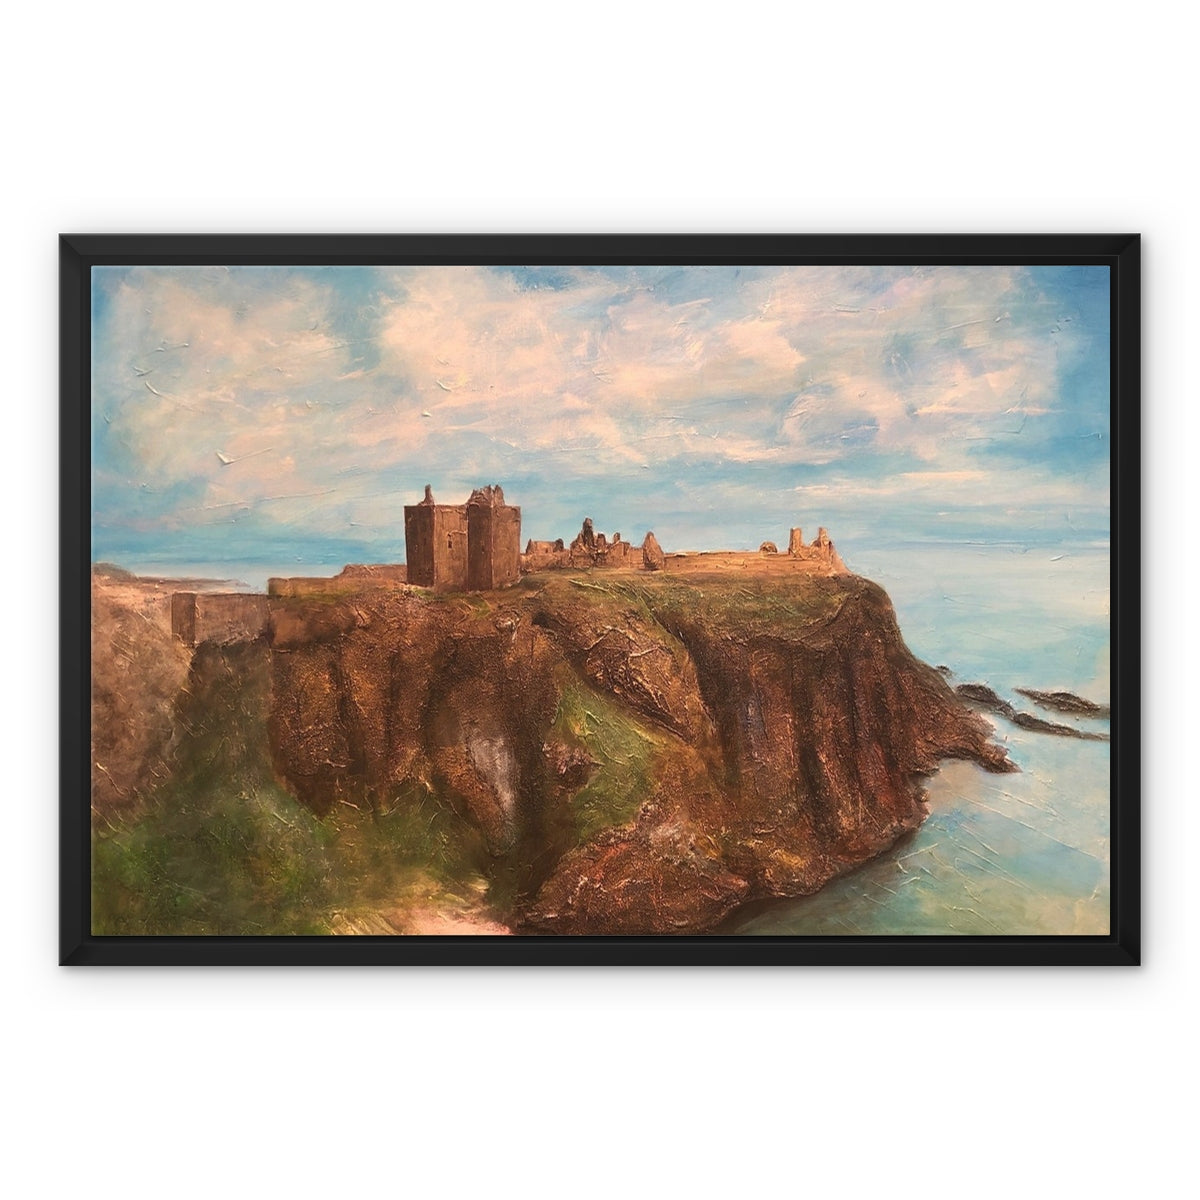 Dunnottar Castle Painting | Framed Canvas From Scotland-Floating Framed Canvas Prints-Historic & Iconic Scotland Art Gallery-24"x18"-Paintings, Prints, Homeware, Art Gifts From Scotland By Scottish Artist Kevin Hunter